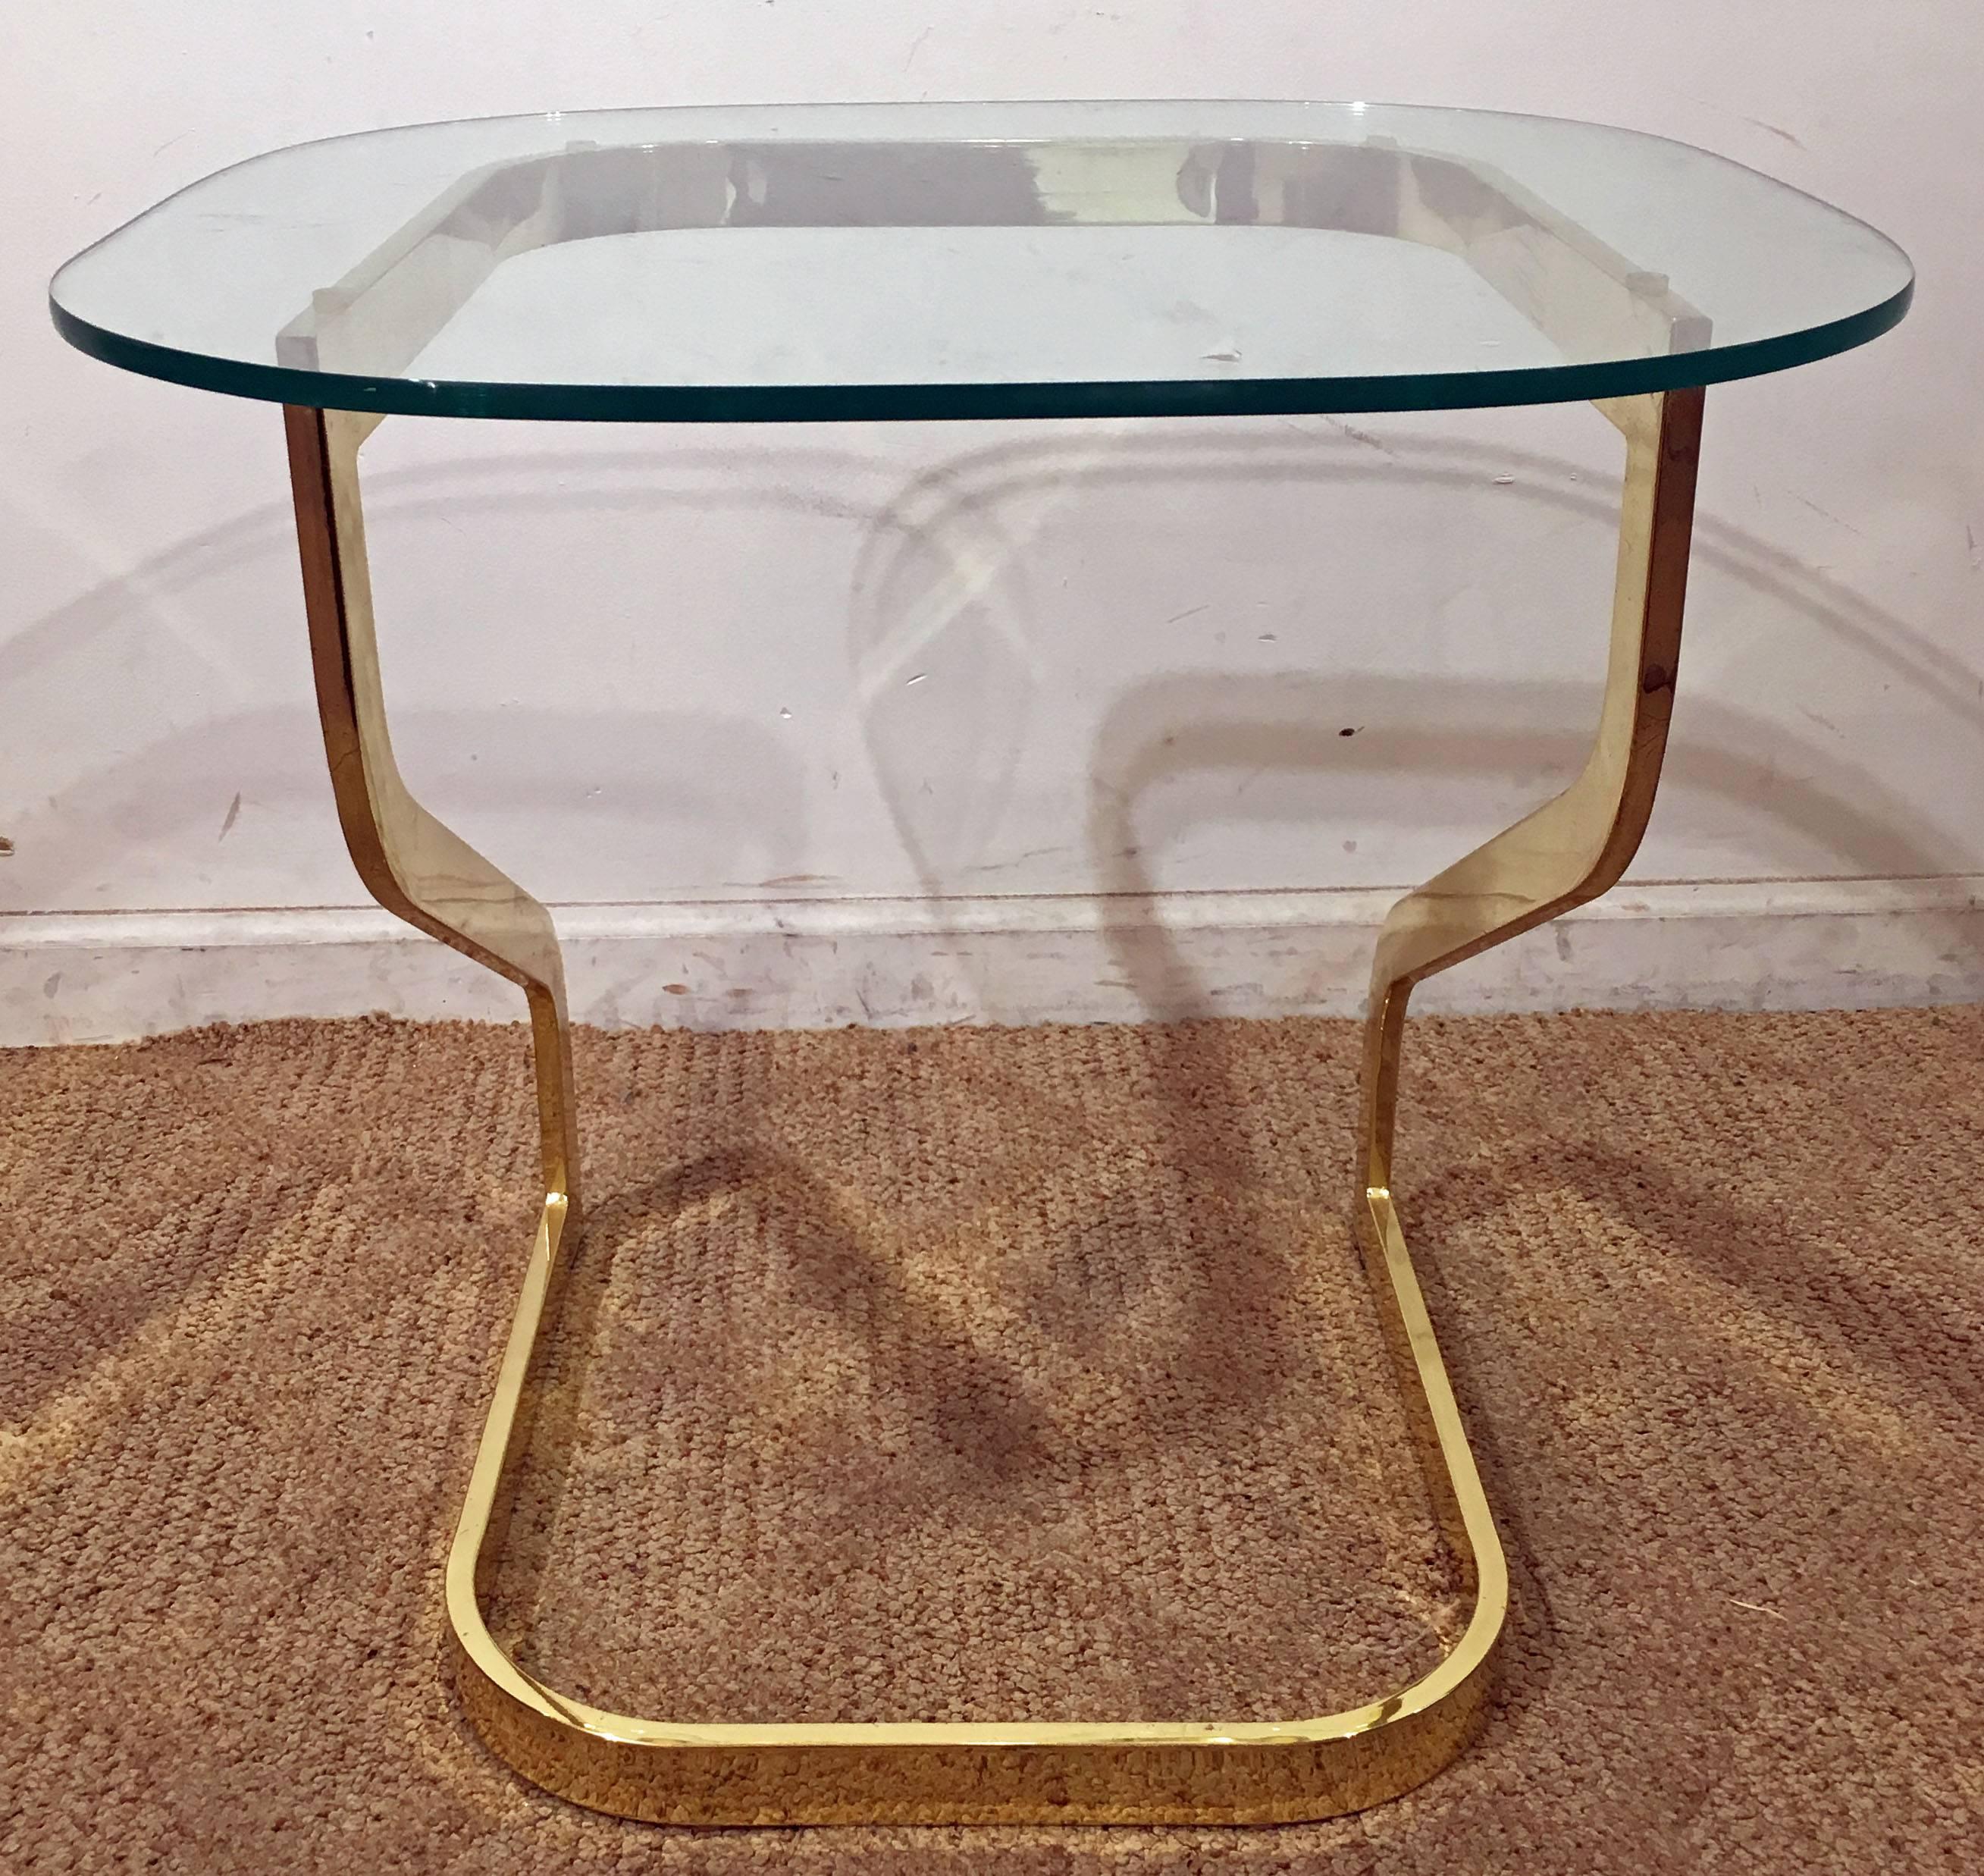 This piece was designed by Milo Baughman. It features a glass-top and golden chrome base. The top is removable.